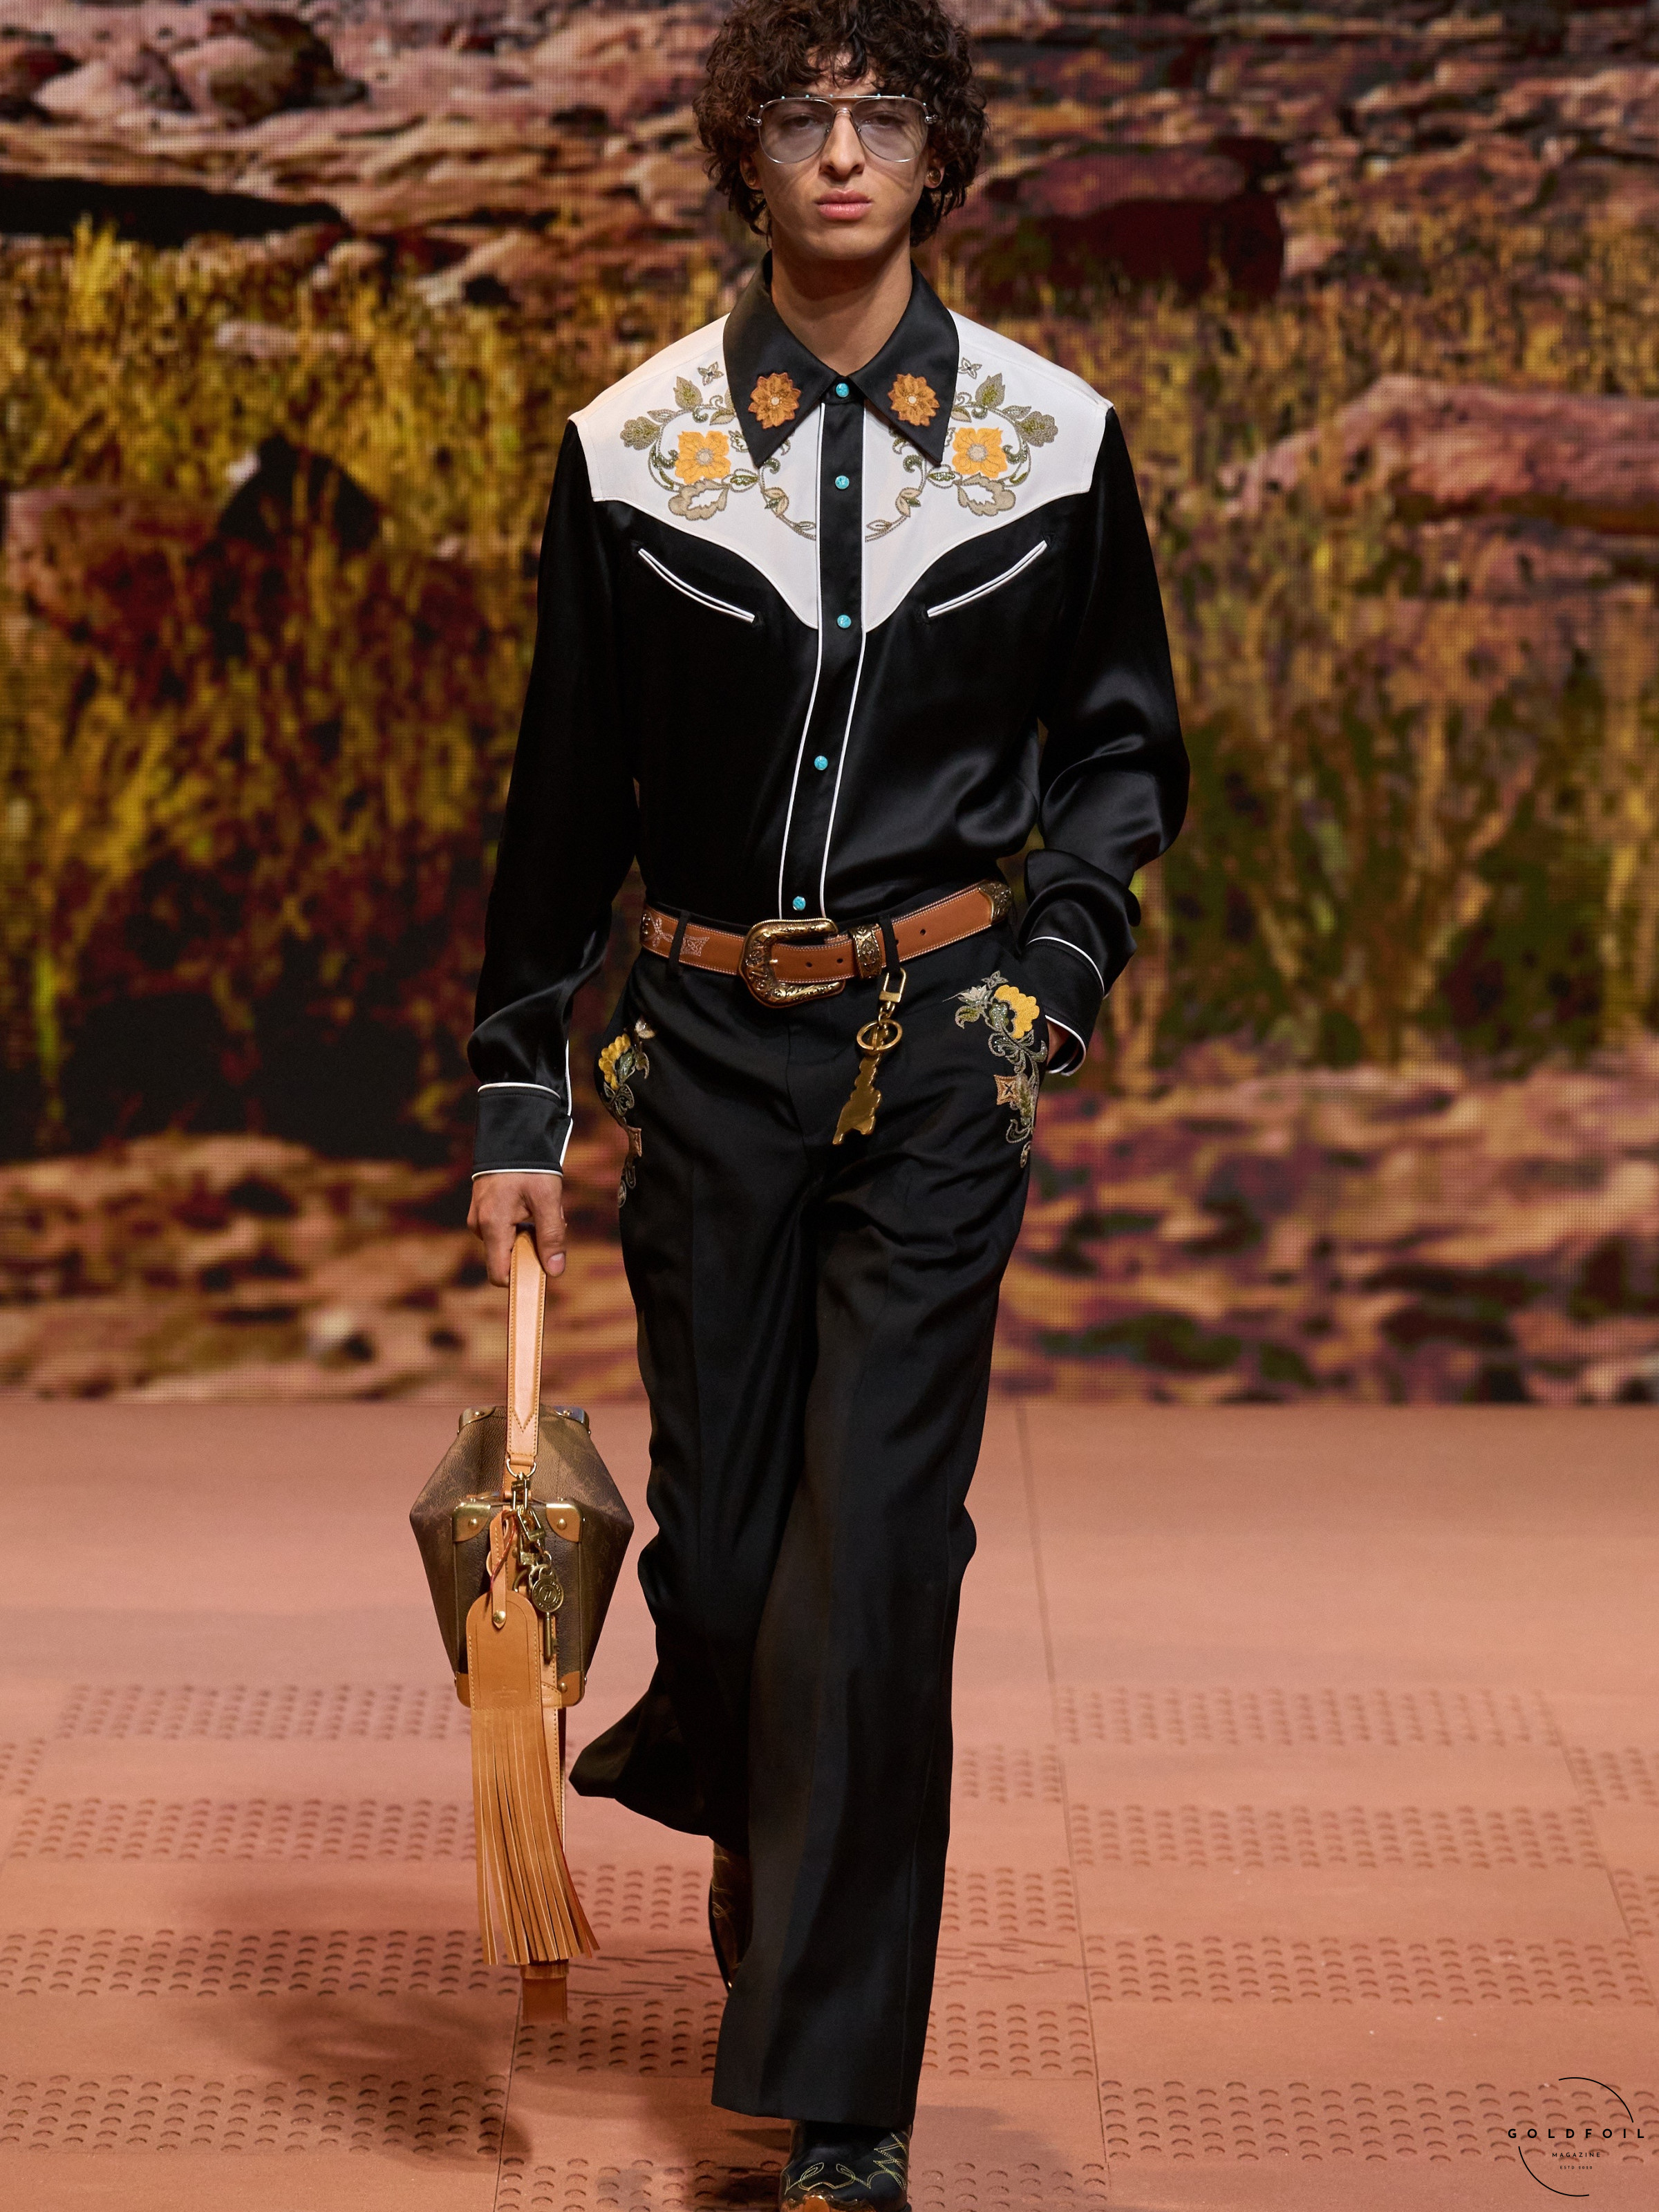 A Louis Vuitton model wearing a black and white block shirt embroidered with yellow flowers, wearing a brown leather buckle belt with a matching saddle inspired bag, and relaxed suit trousers